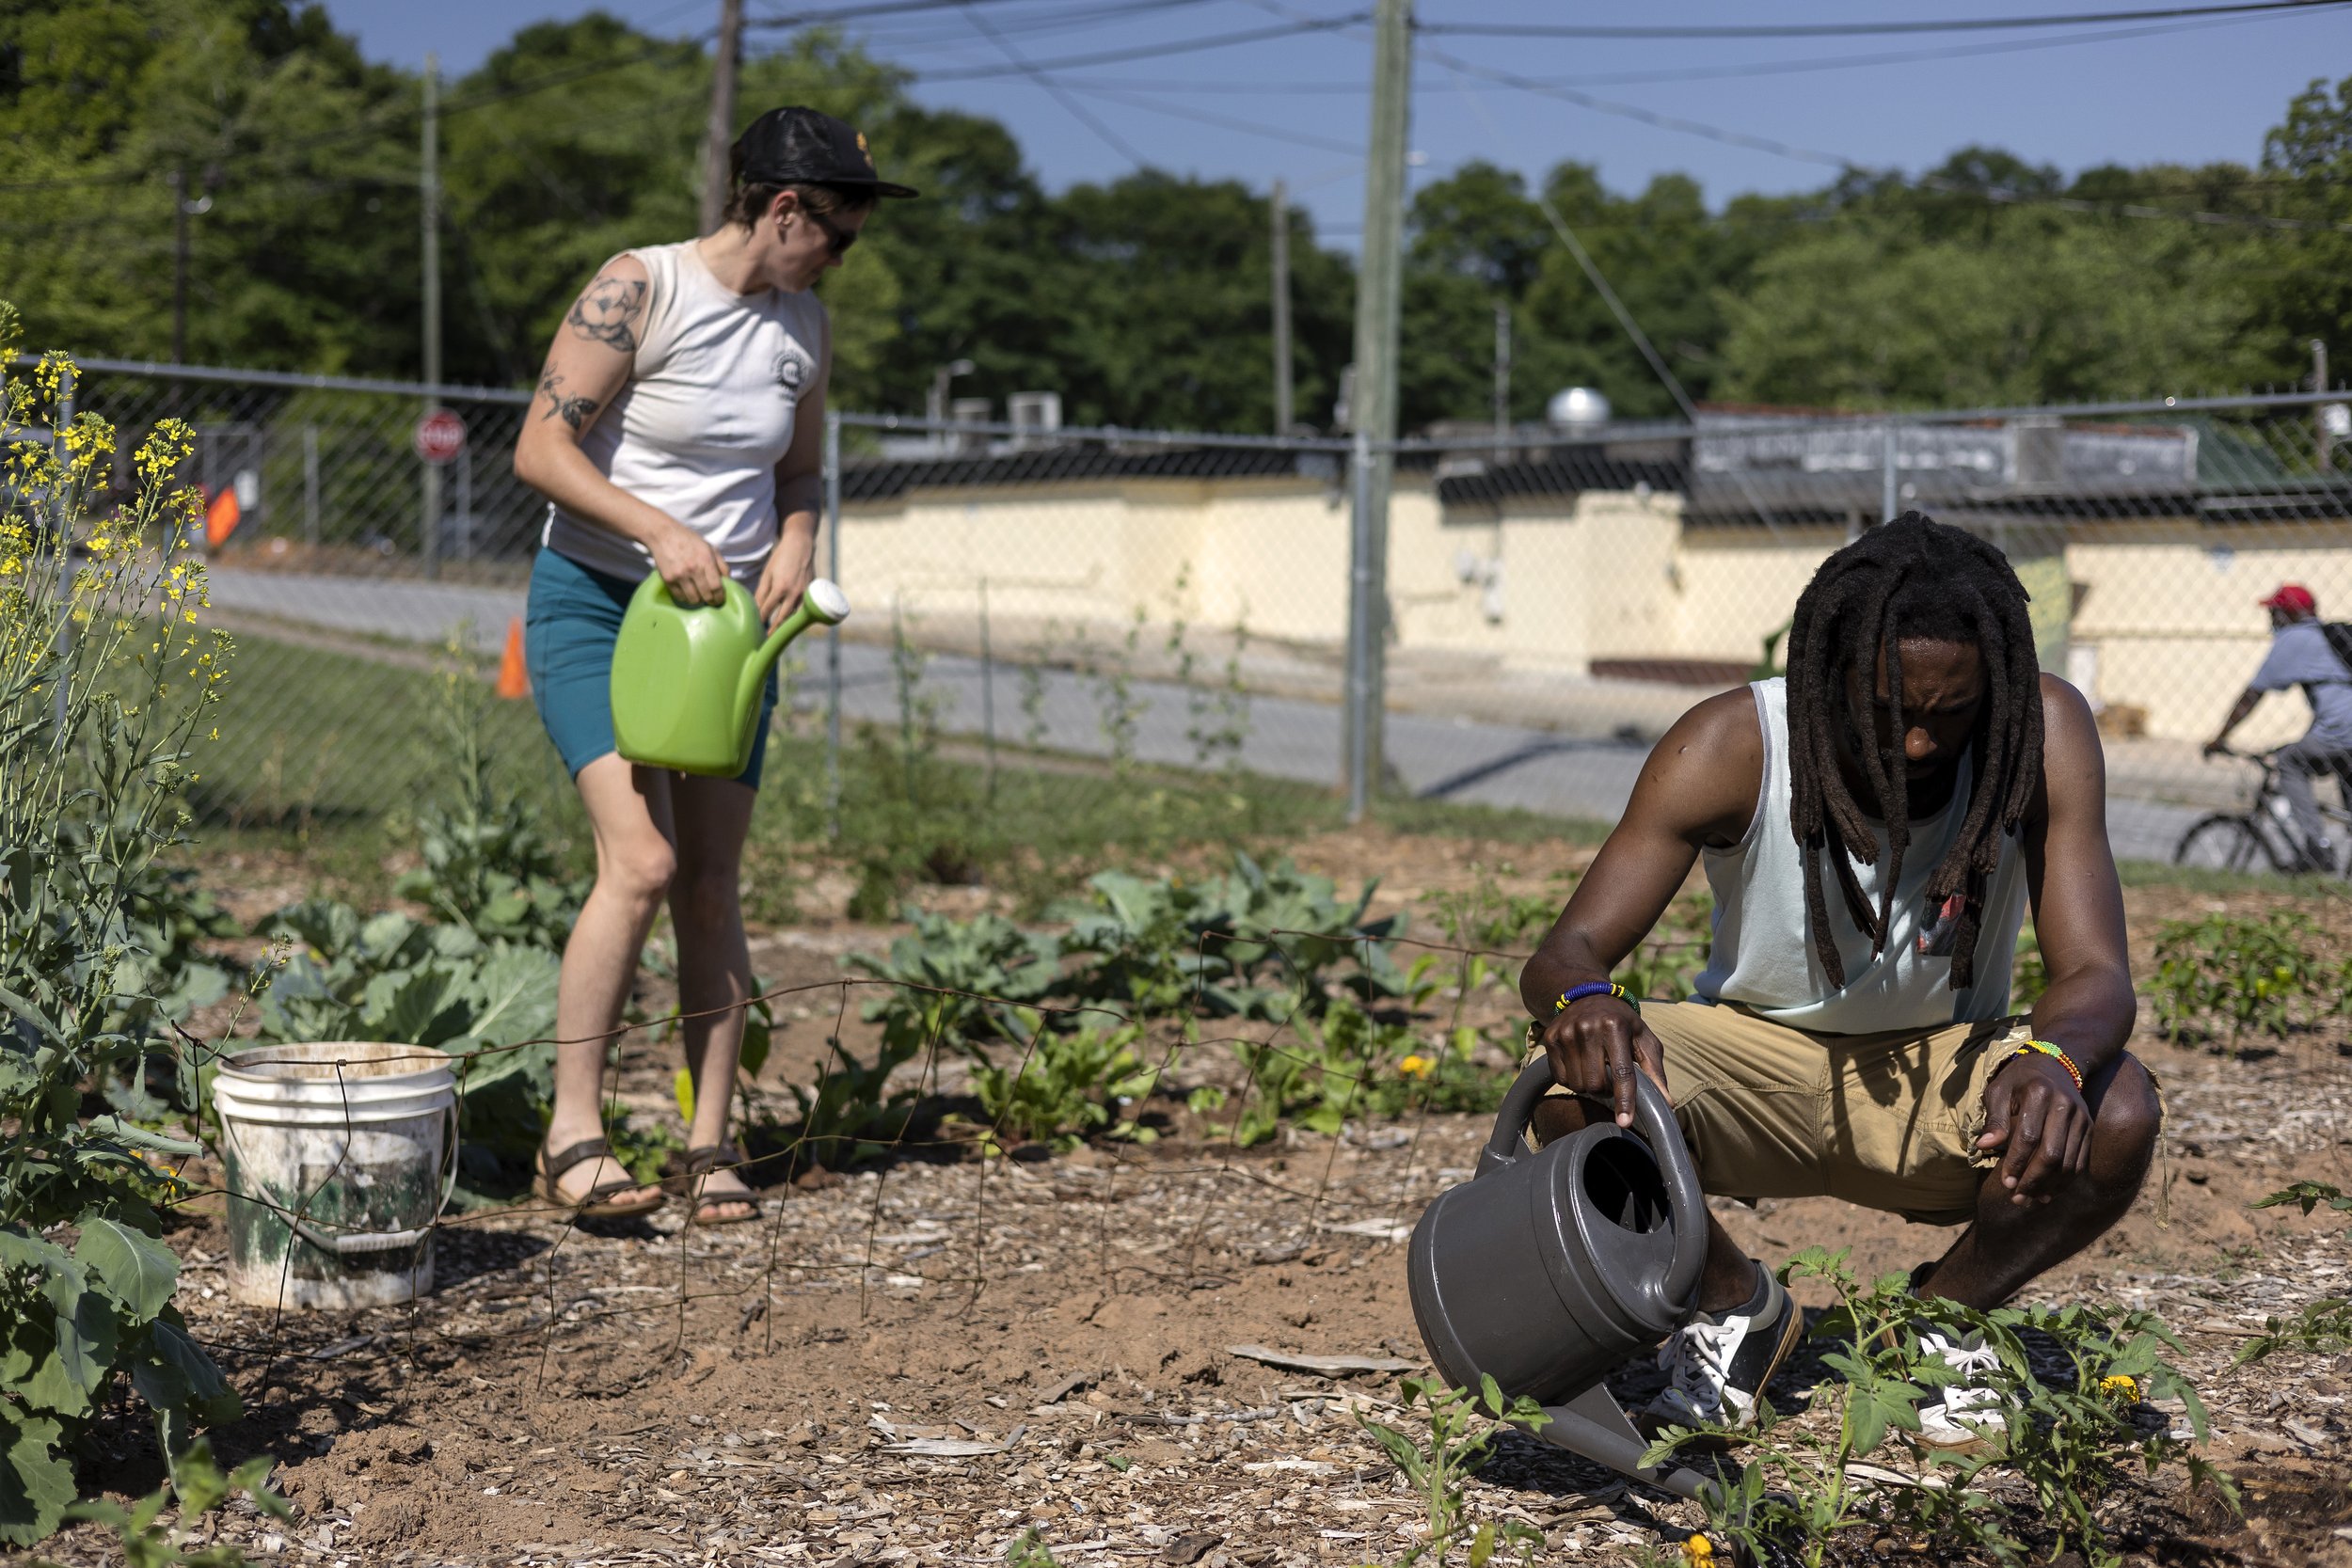  Broderick Flanigan, local artist and community activist, right, waters vegetables in Farm to Neighborhood’s community garden on Thursday, June 2, 2022 in Athens. The garden was established in 2018 and serves residents primarily in the Nellie B neigh